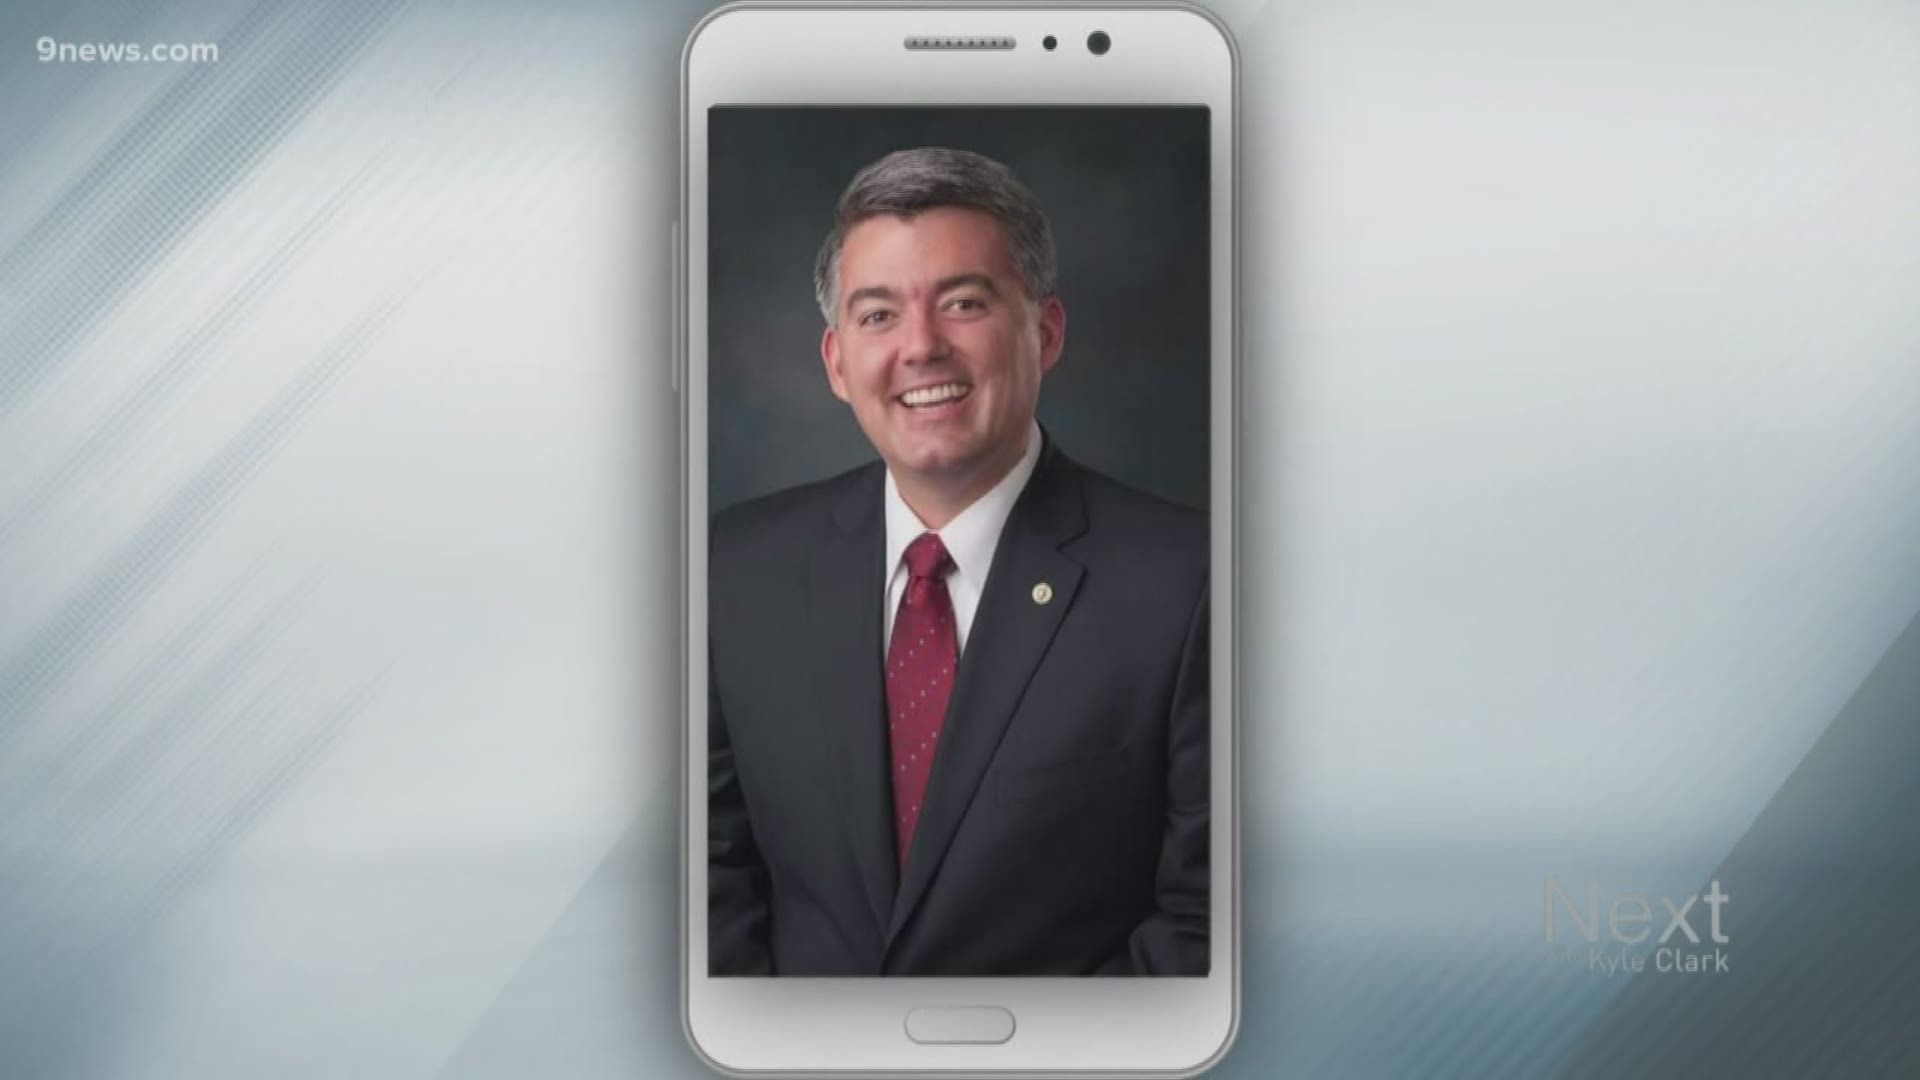 If you want to talk with Cory Gardner, you either need to be on his flight from DC to Denver or call his office. But you better dial correctly or might get Laura.